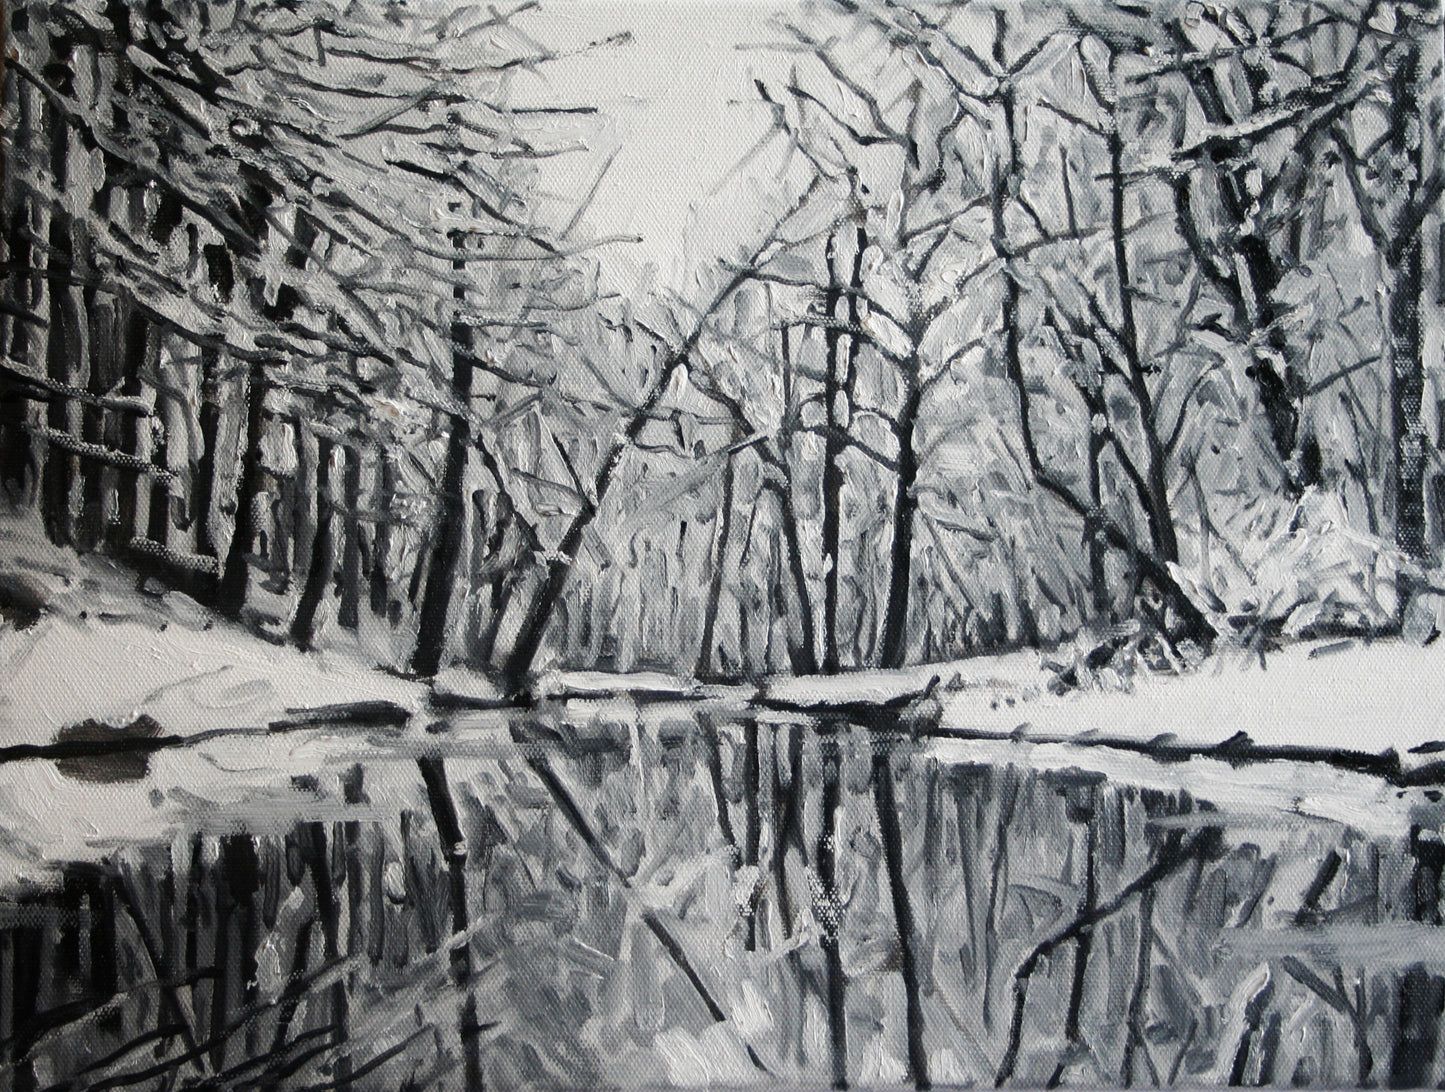 Trees in Snow with Pond (2019)